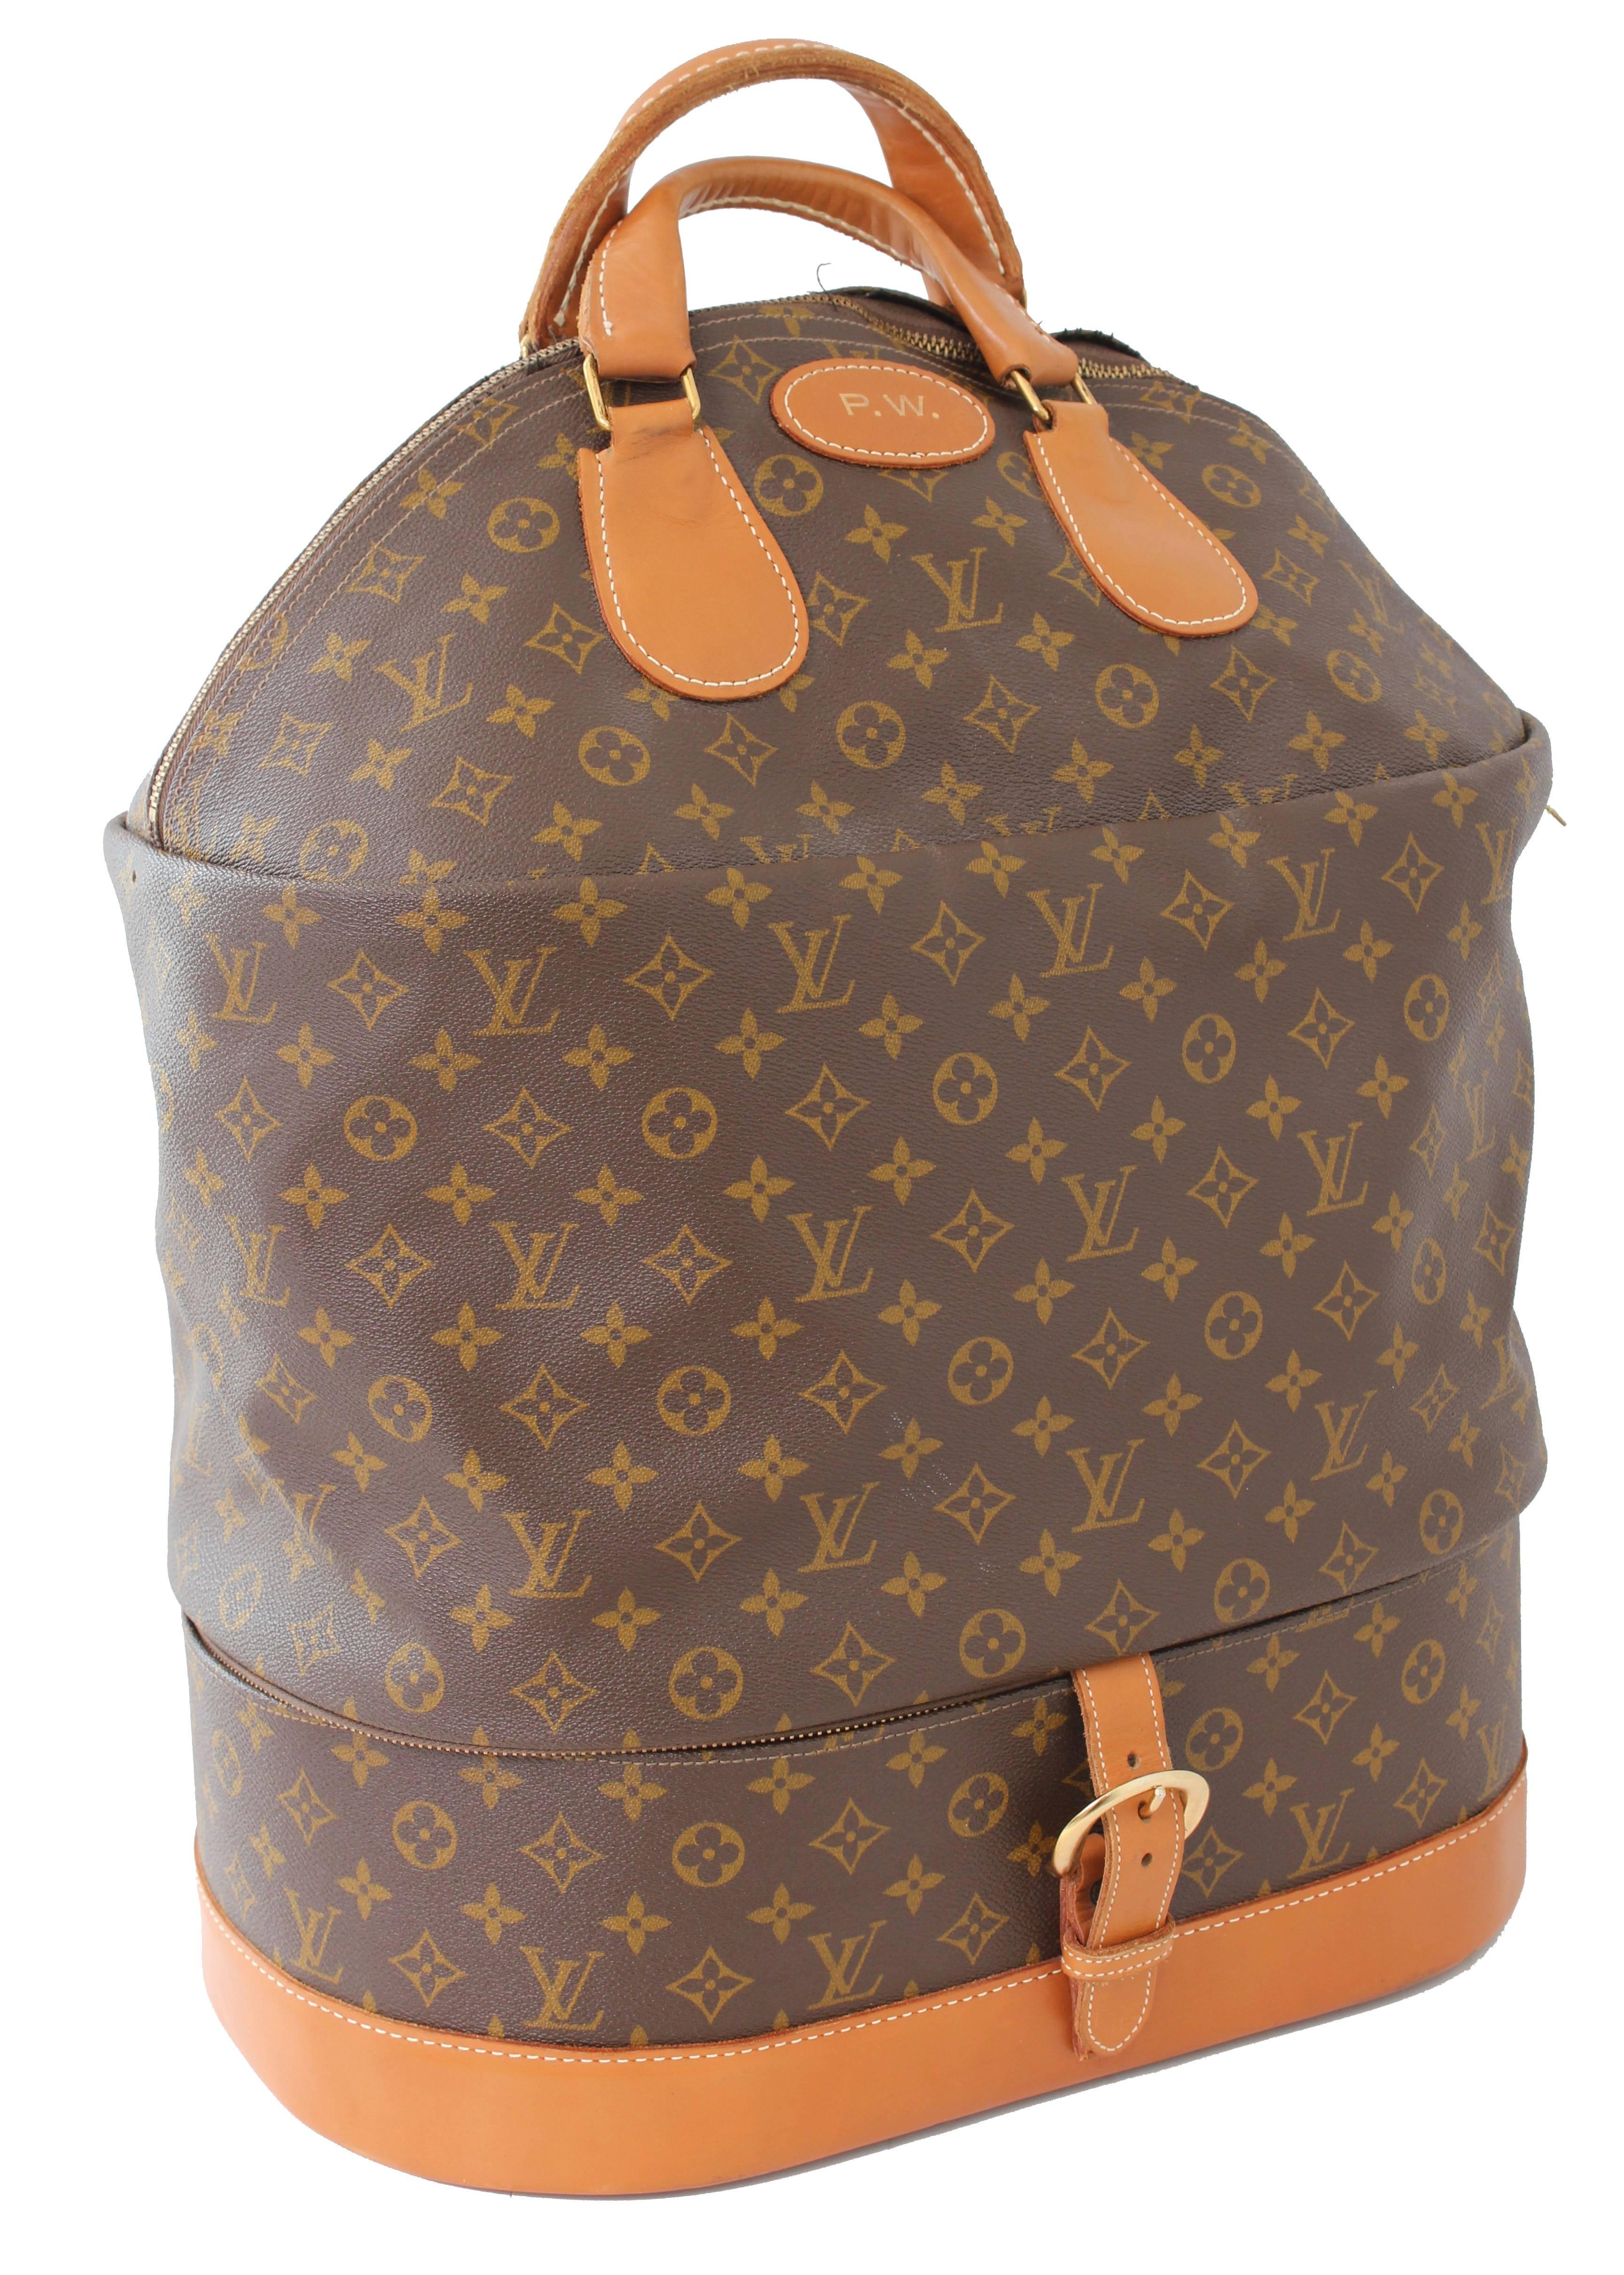 This large and very rare travel bag was originally sold by Neiman Marcus and made under special license by The French Company for Louis Vuitton, long before LV had a boutique presence in the USA. Produced for only a short period, these incredible